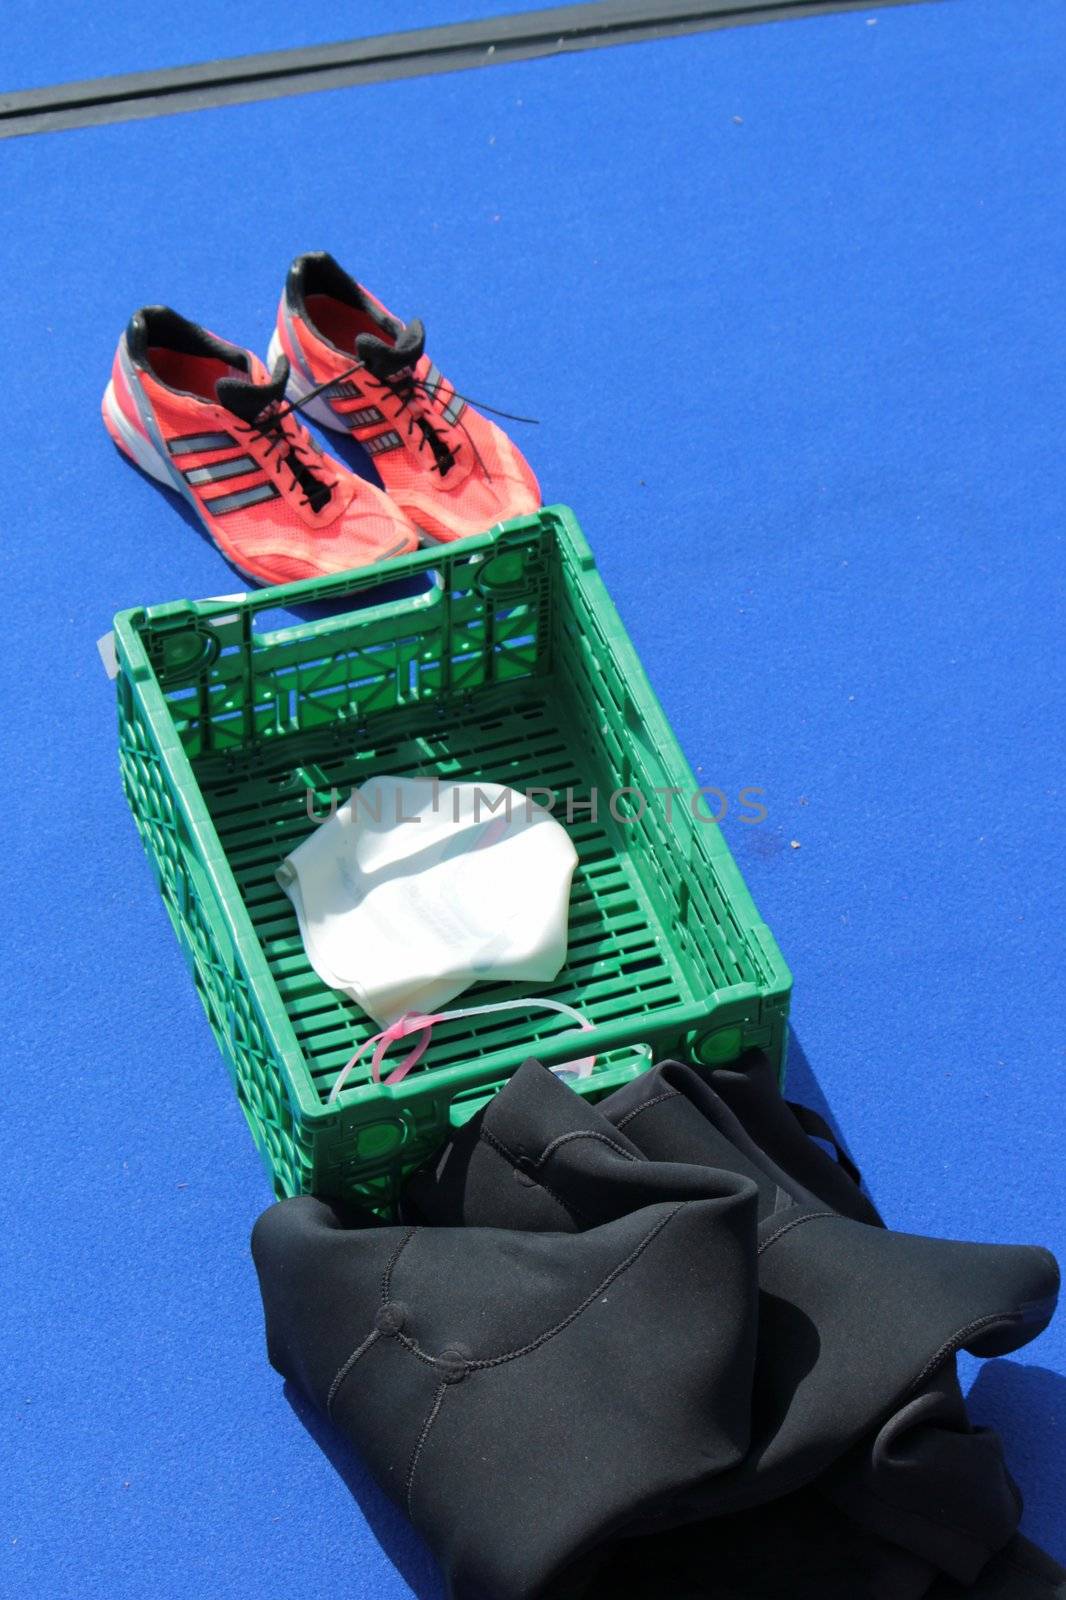 Transition space with running shoes, box and swimming clothes for athlet at the 2012 International Geneva Triathlon, Switzerland.